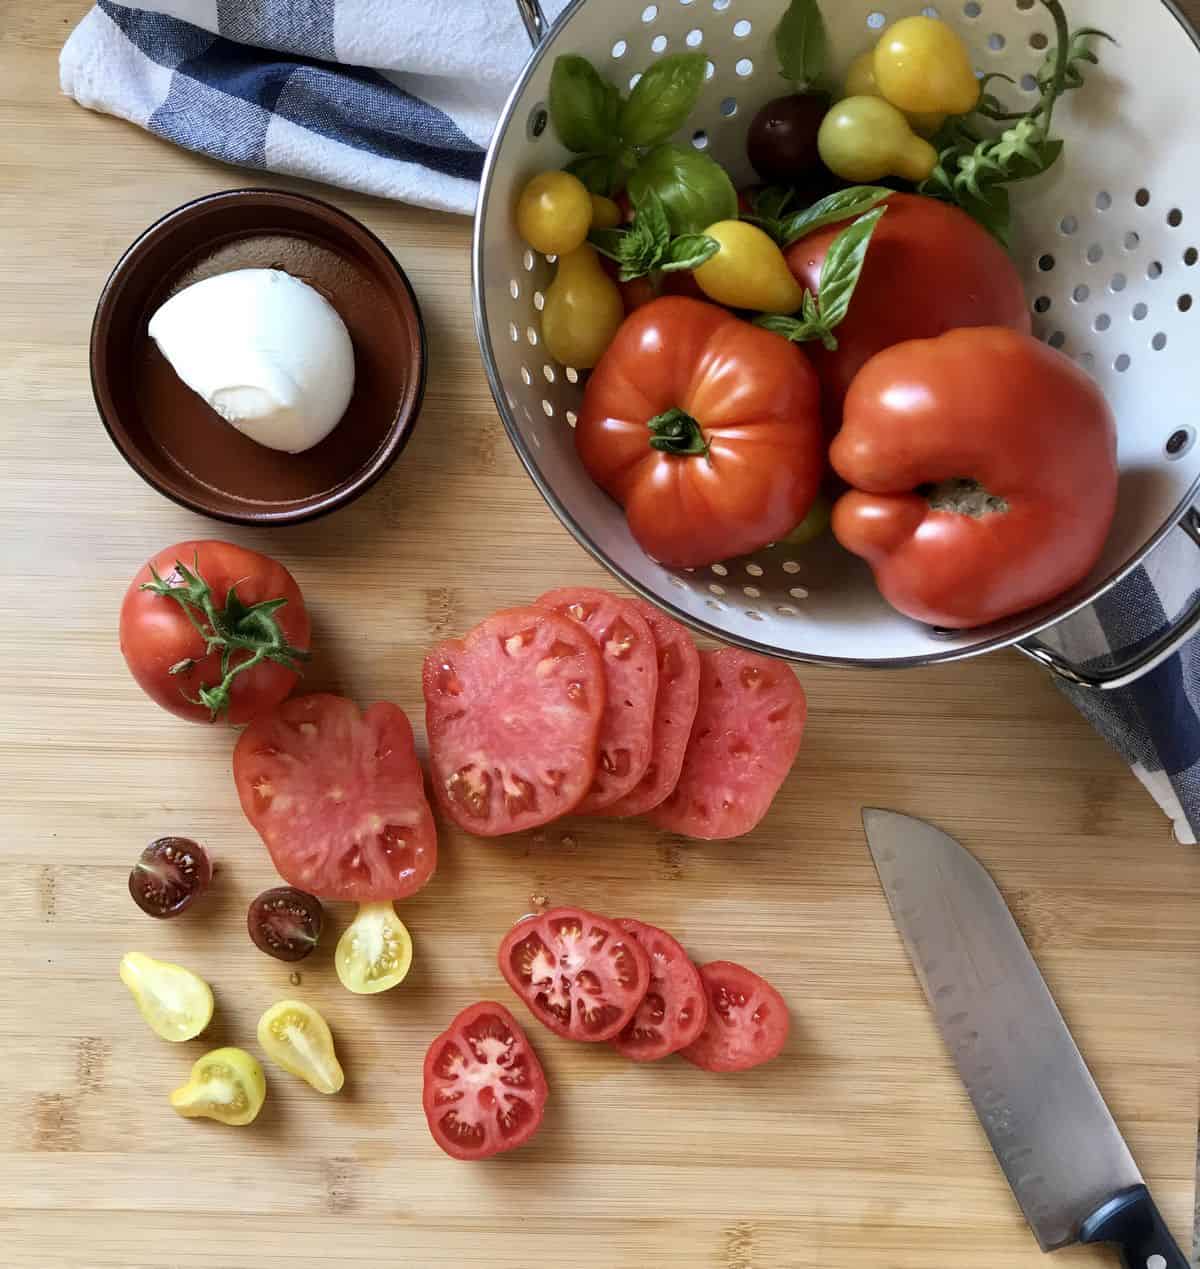 Sliced heirloom tomatoes on a wooden board.